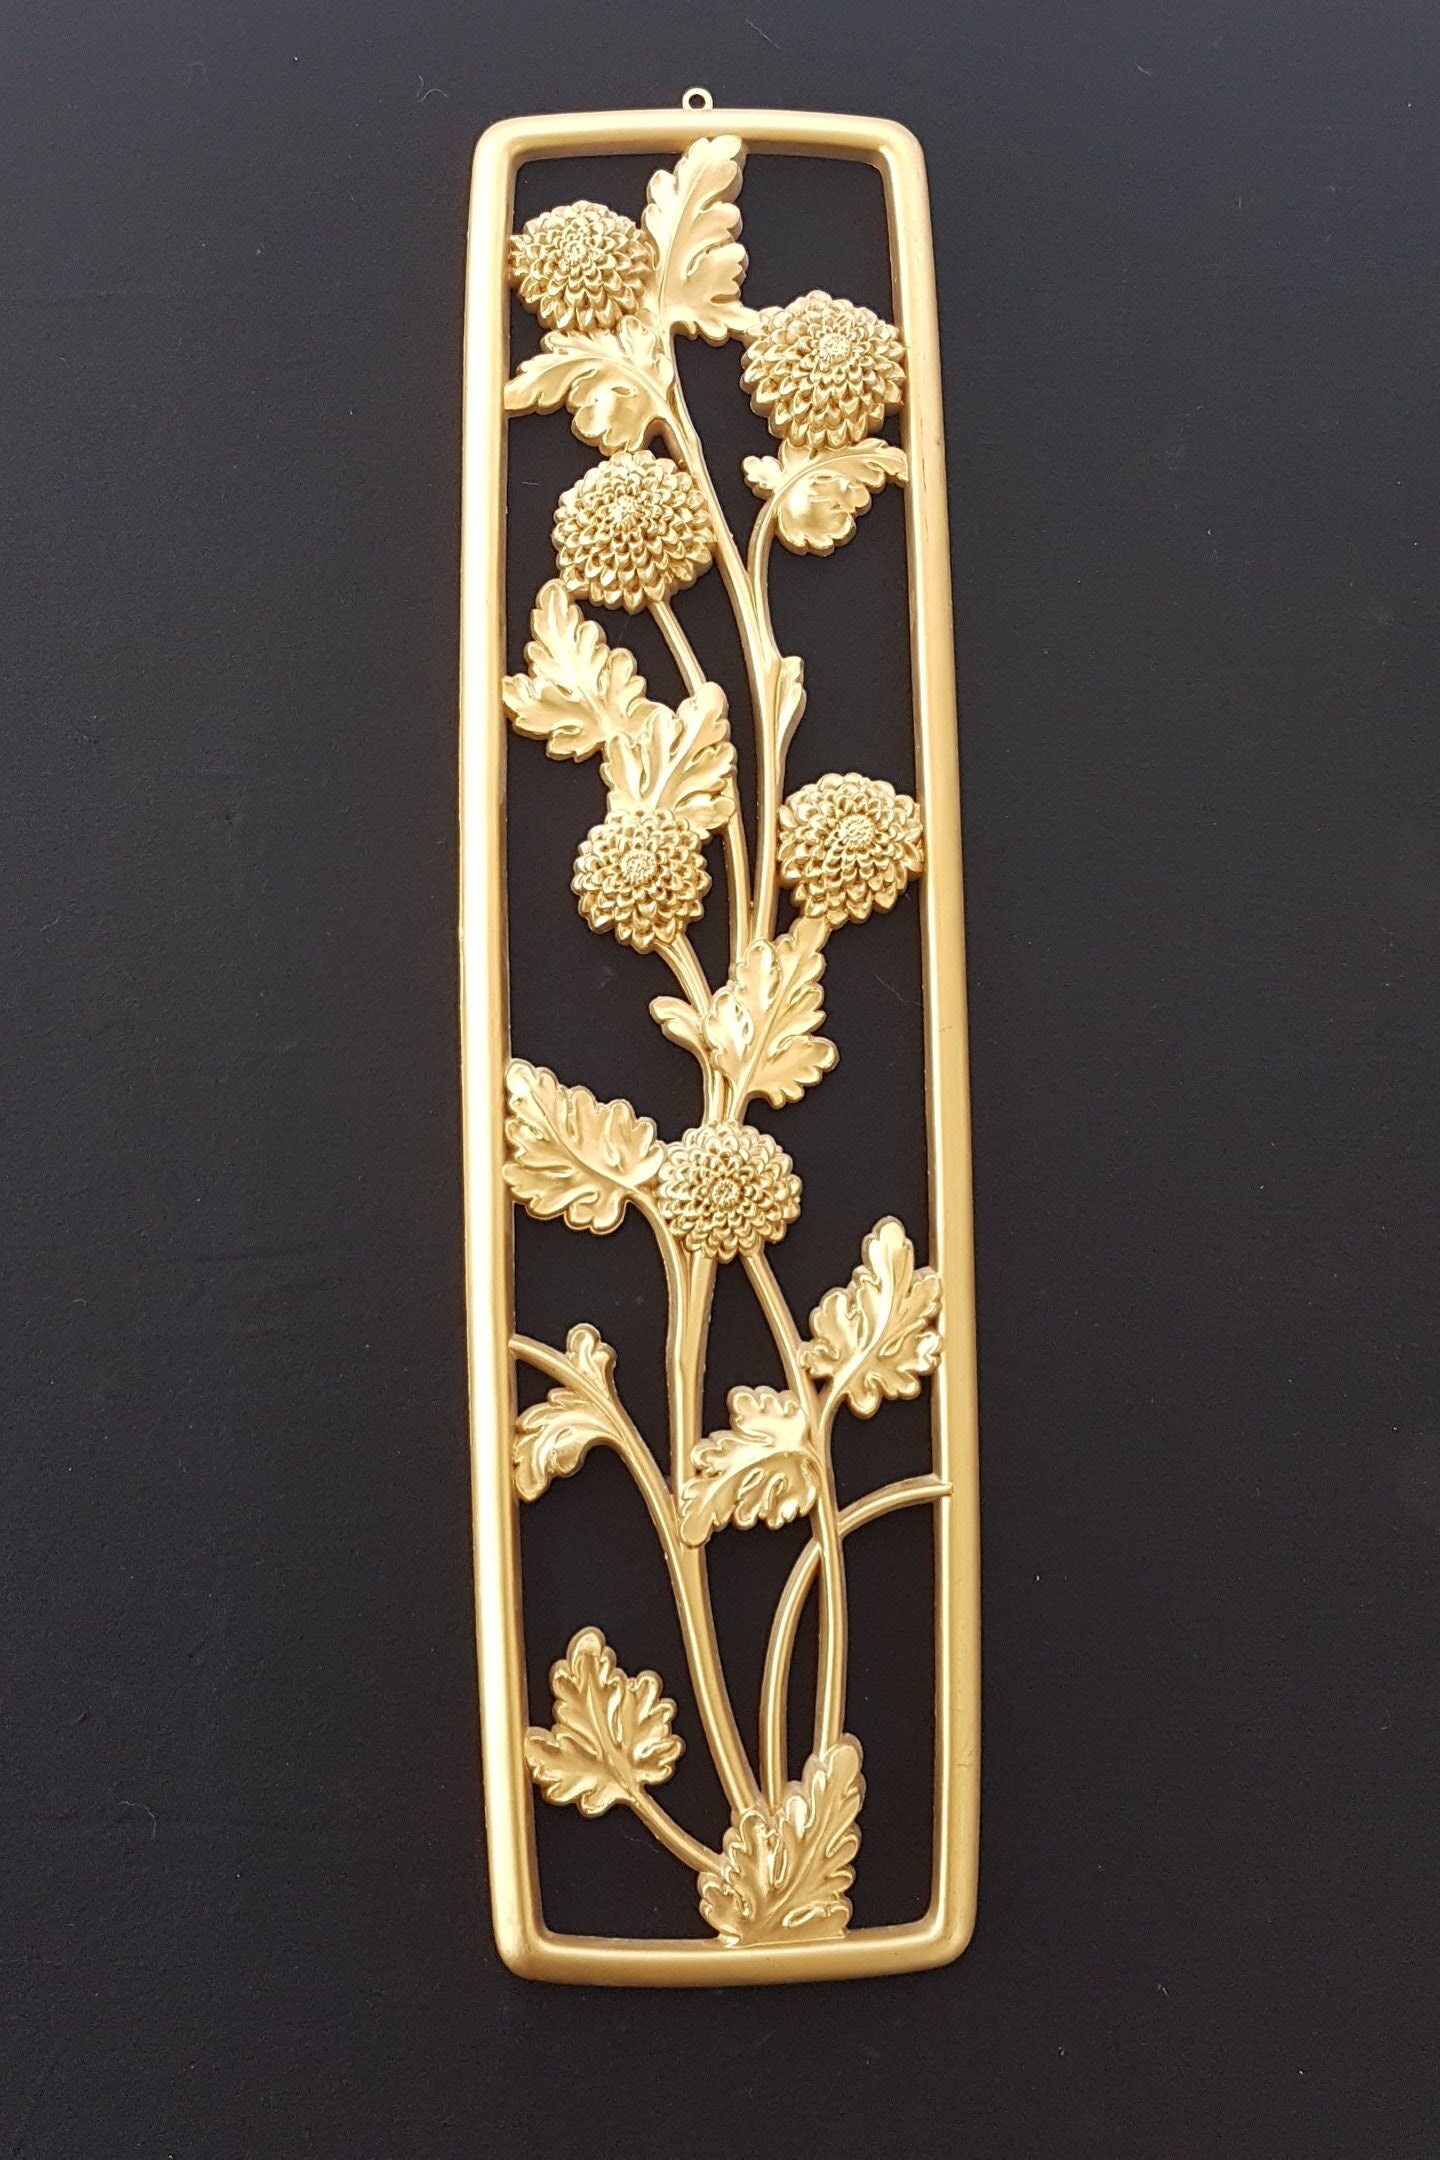 Four Seasons Floral Wall Art Mid Century Gold Resin Wall Plaques By Dart Industries 4773